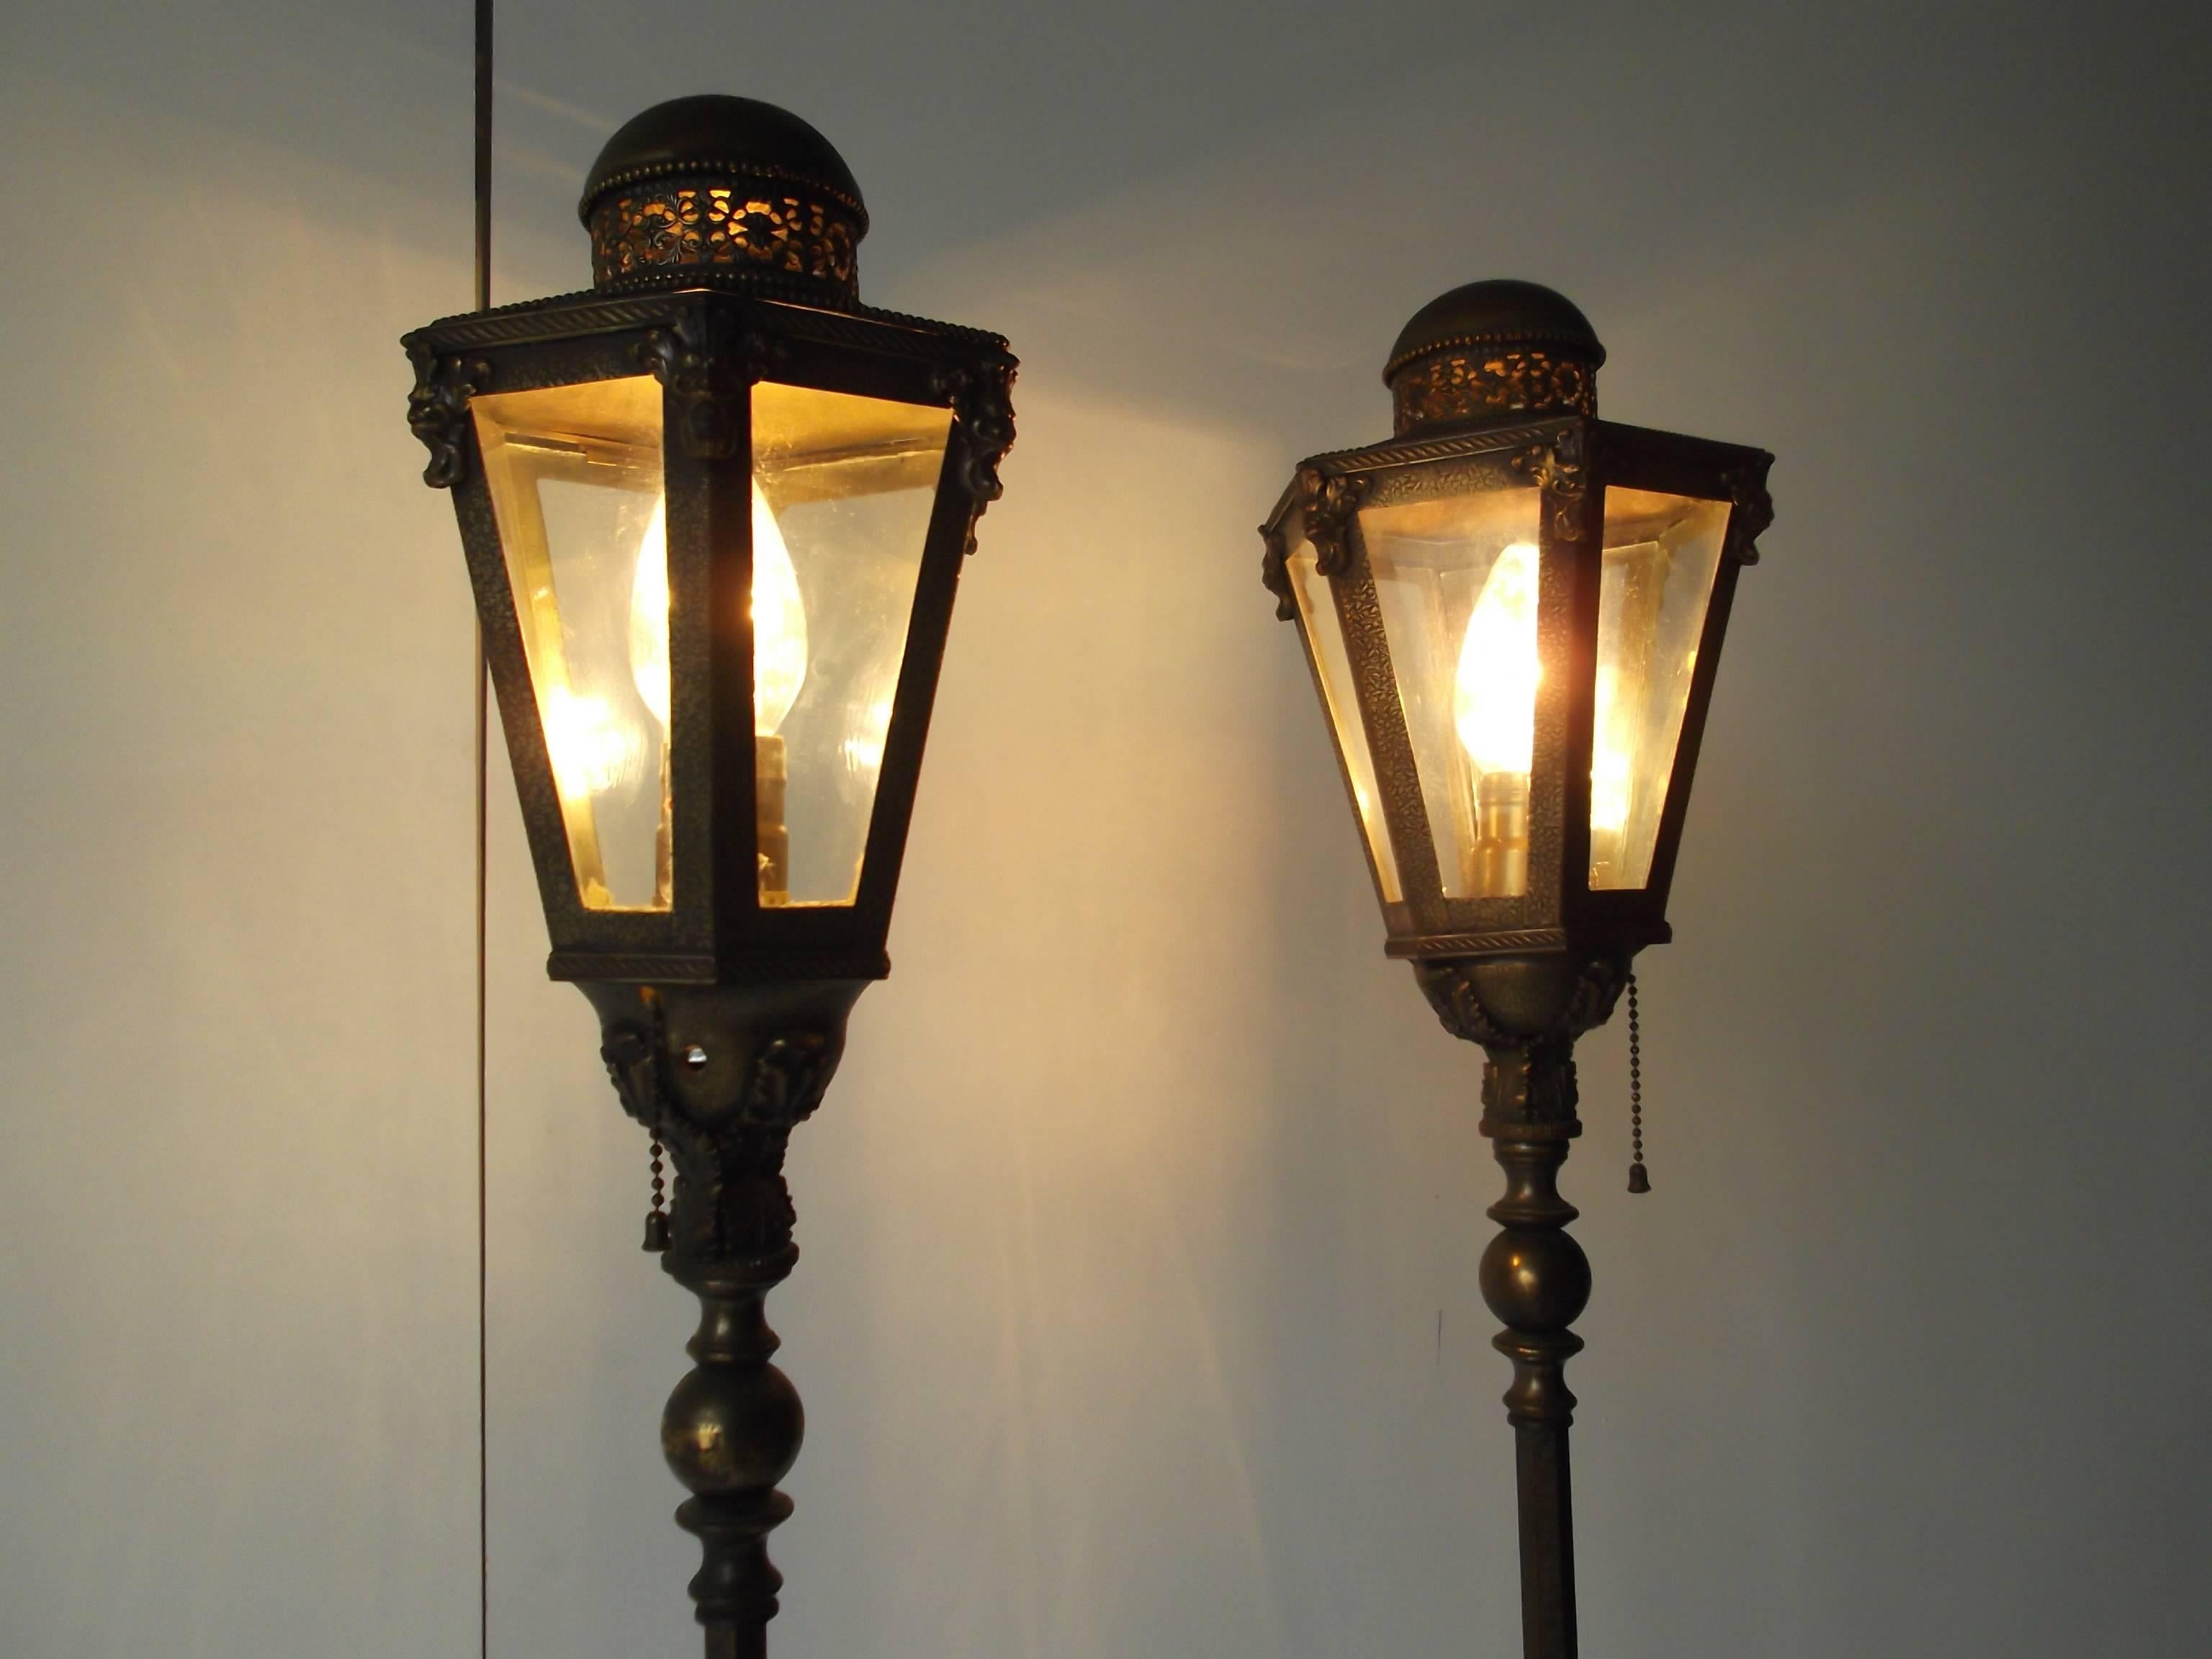 Fantastic pair of antique floor lamps. They have six-sided lanterns to the tops to match their hexagon Onyx and ornate brass bases below. The bases have mounted red and turquoise stones. Wow! They tower at 68